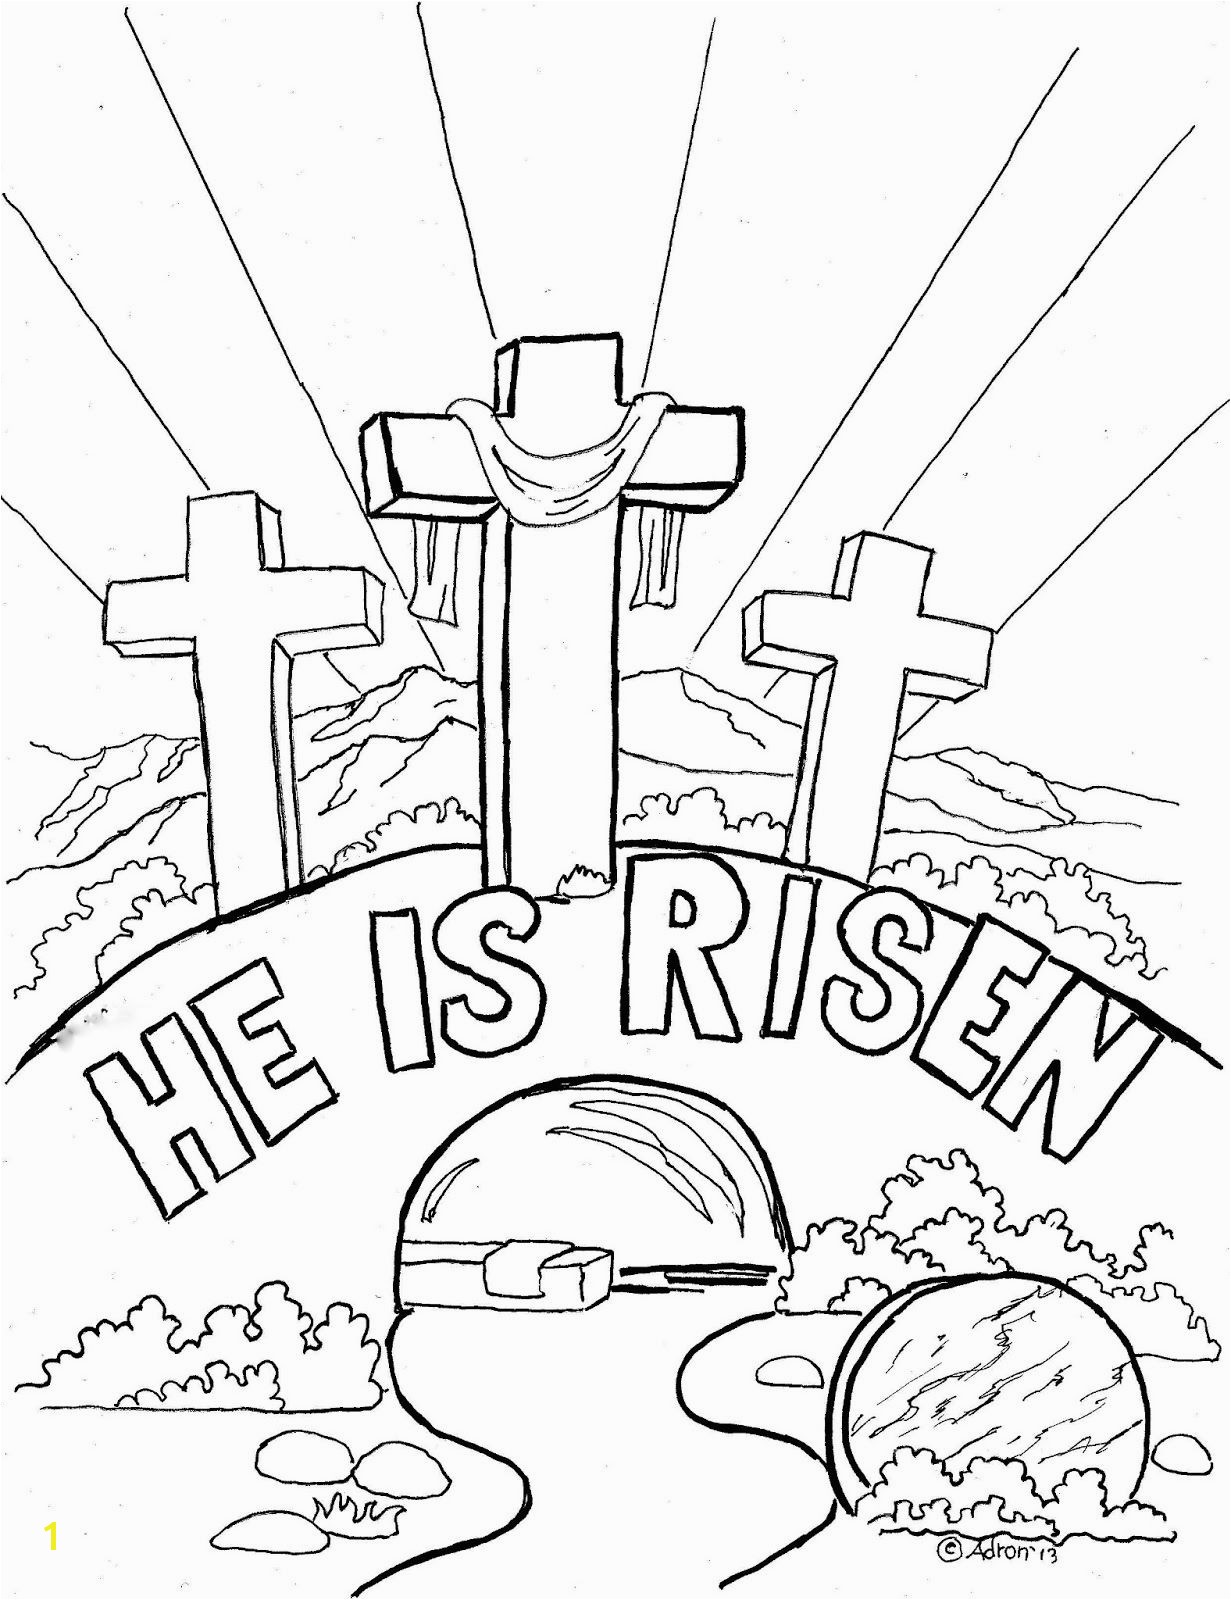 Free Religious Easter Coloring Pages Coloring Pages for Kids by Mr Adron Easter Coloring Page for Kids